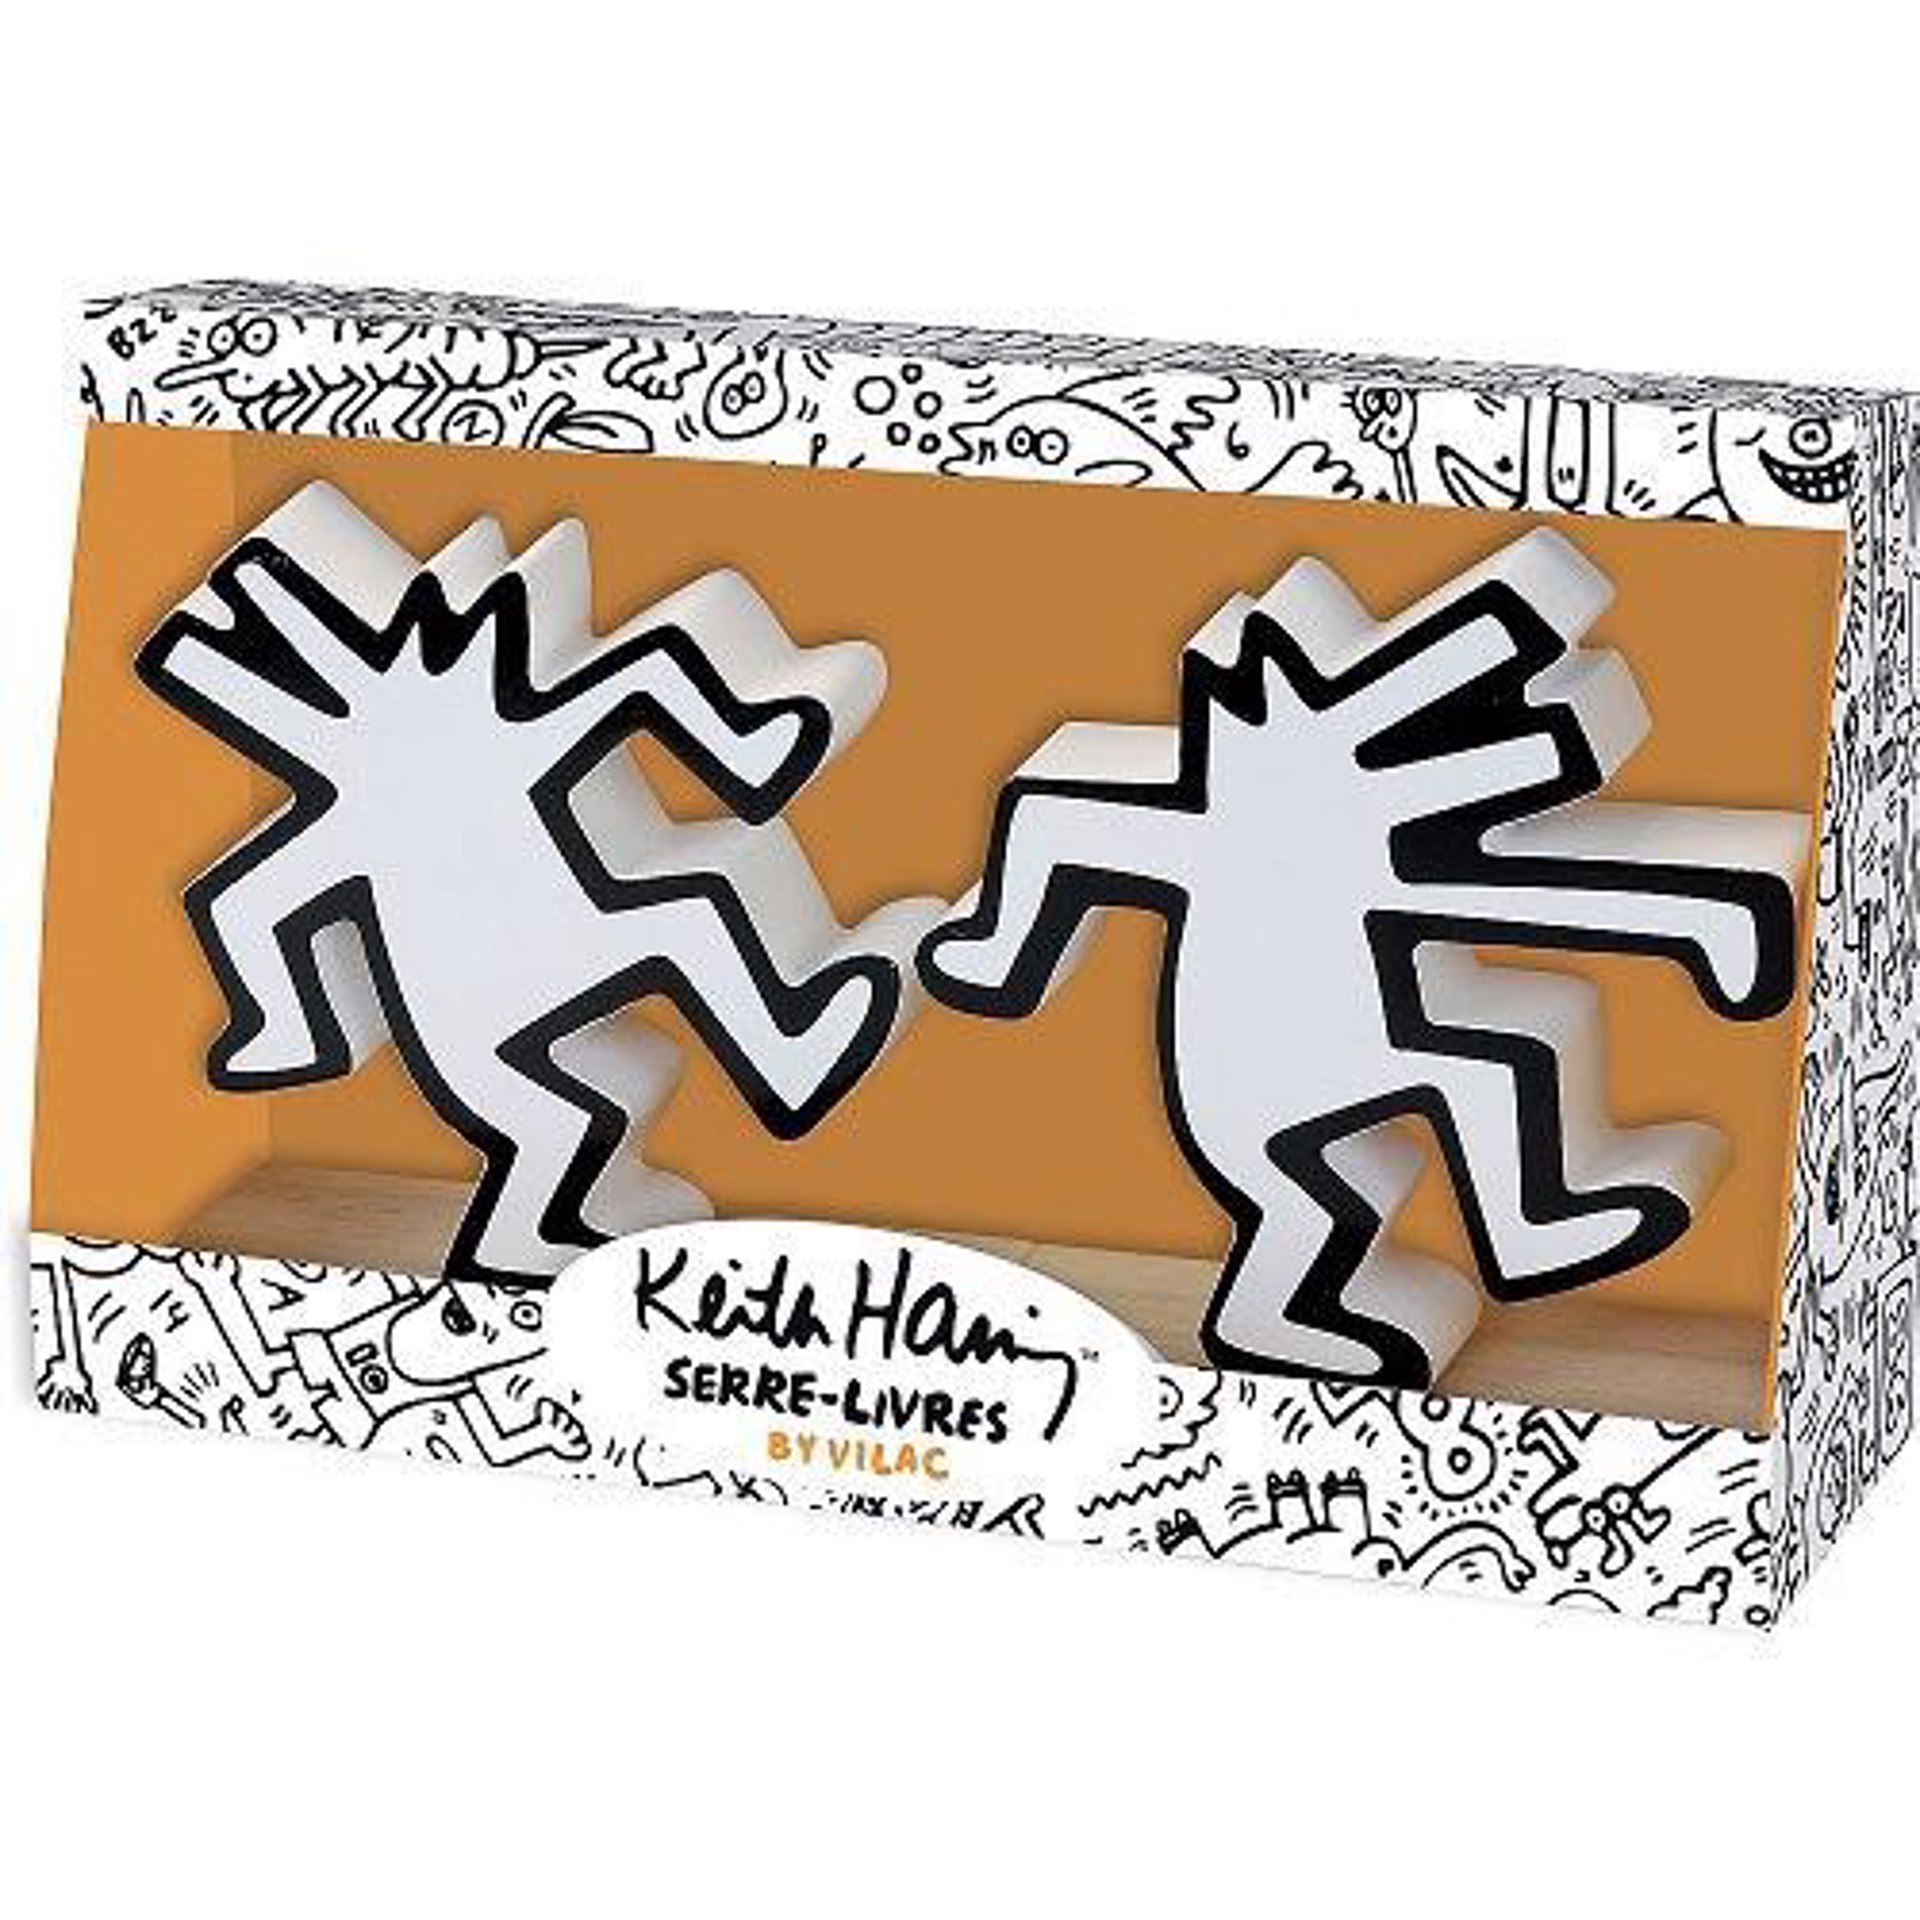 Keith Haring Bookends by Keith Haring